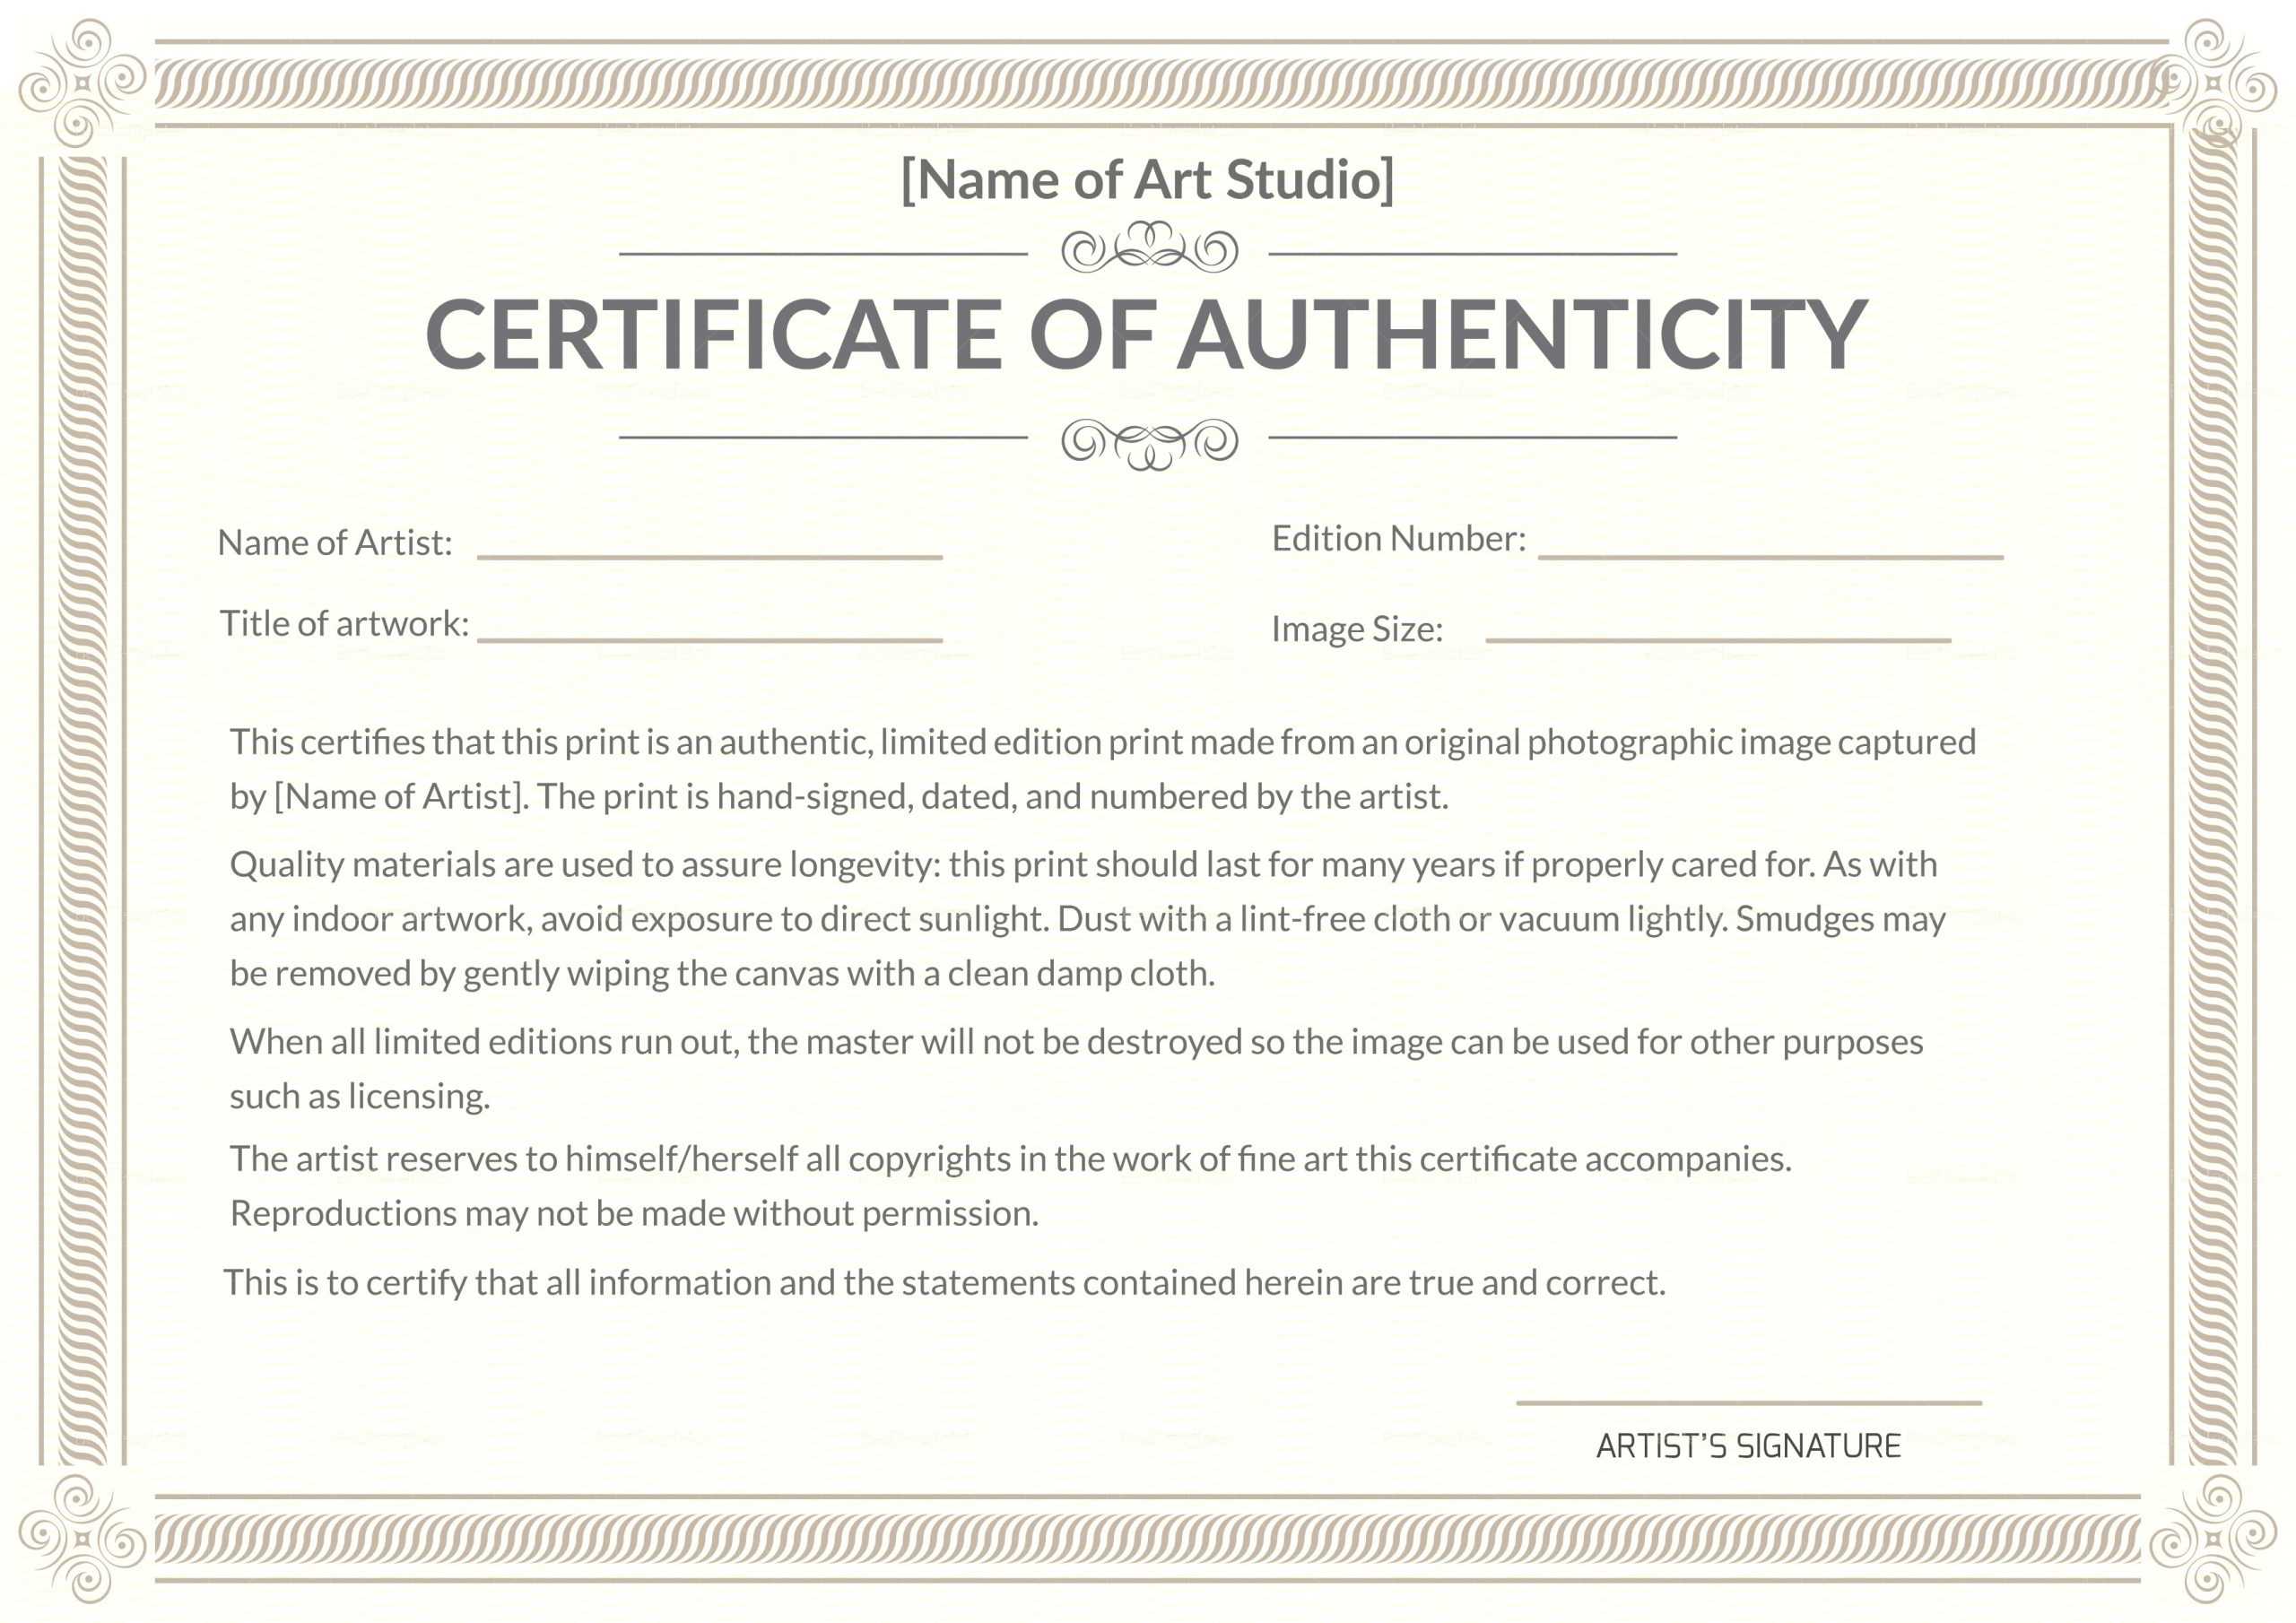 Certificate Of Authenticity Template Autograph Templates Pertaining To Certificate Of Authenticity Photography Template